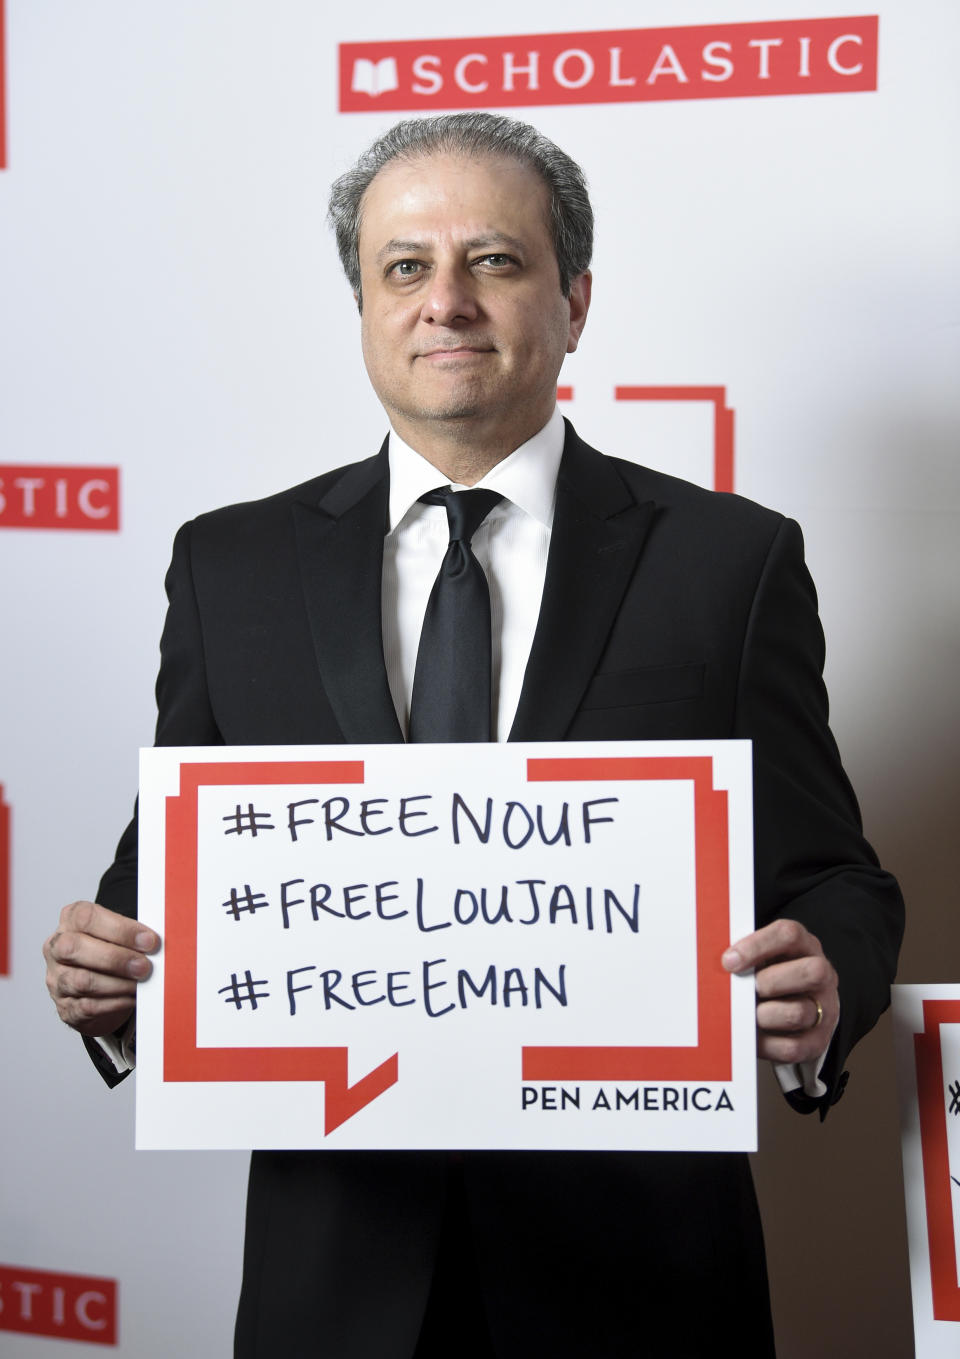 Former United States Attorney for the Southern District of New York and author Preet Bharara poses holding a sign in support of jailed Saudi women's rights activists Nouf Abdulaziz, Loujain Al-Hathloul and Eman Al-Nafjan at the 2019 PEN America Literary Gala at the American Museum of Natural History on Tuesday, May 21, 2019, in New York. (Photo by Evan Agostini/Invision/AP)